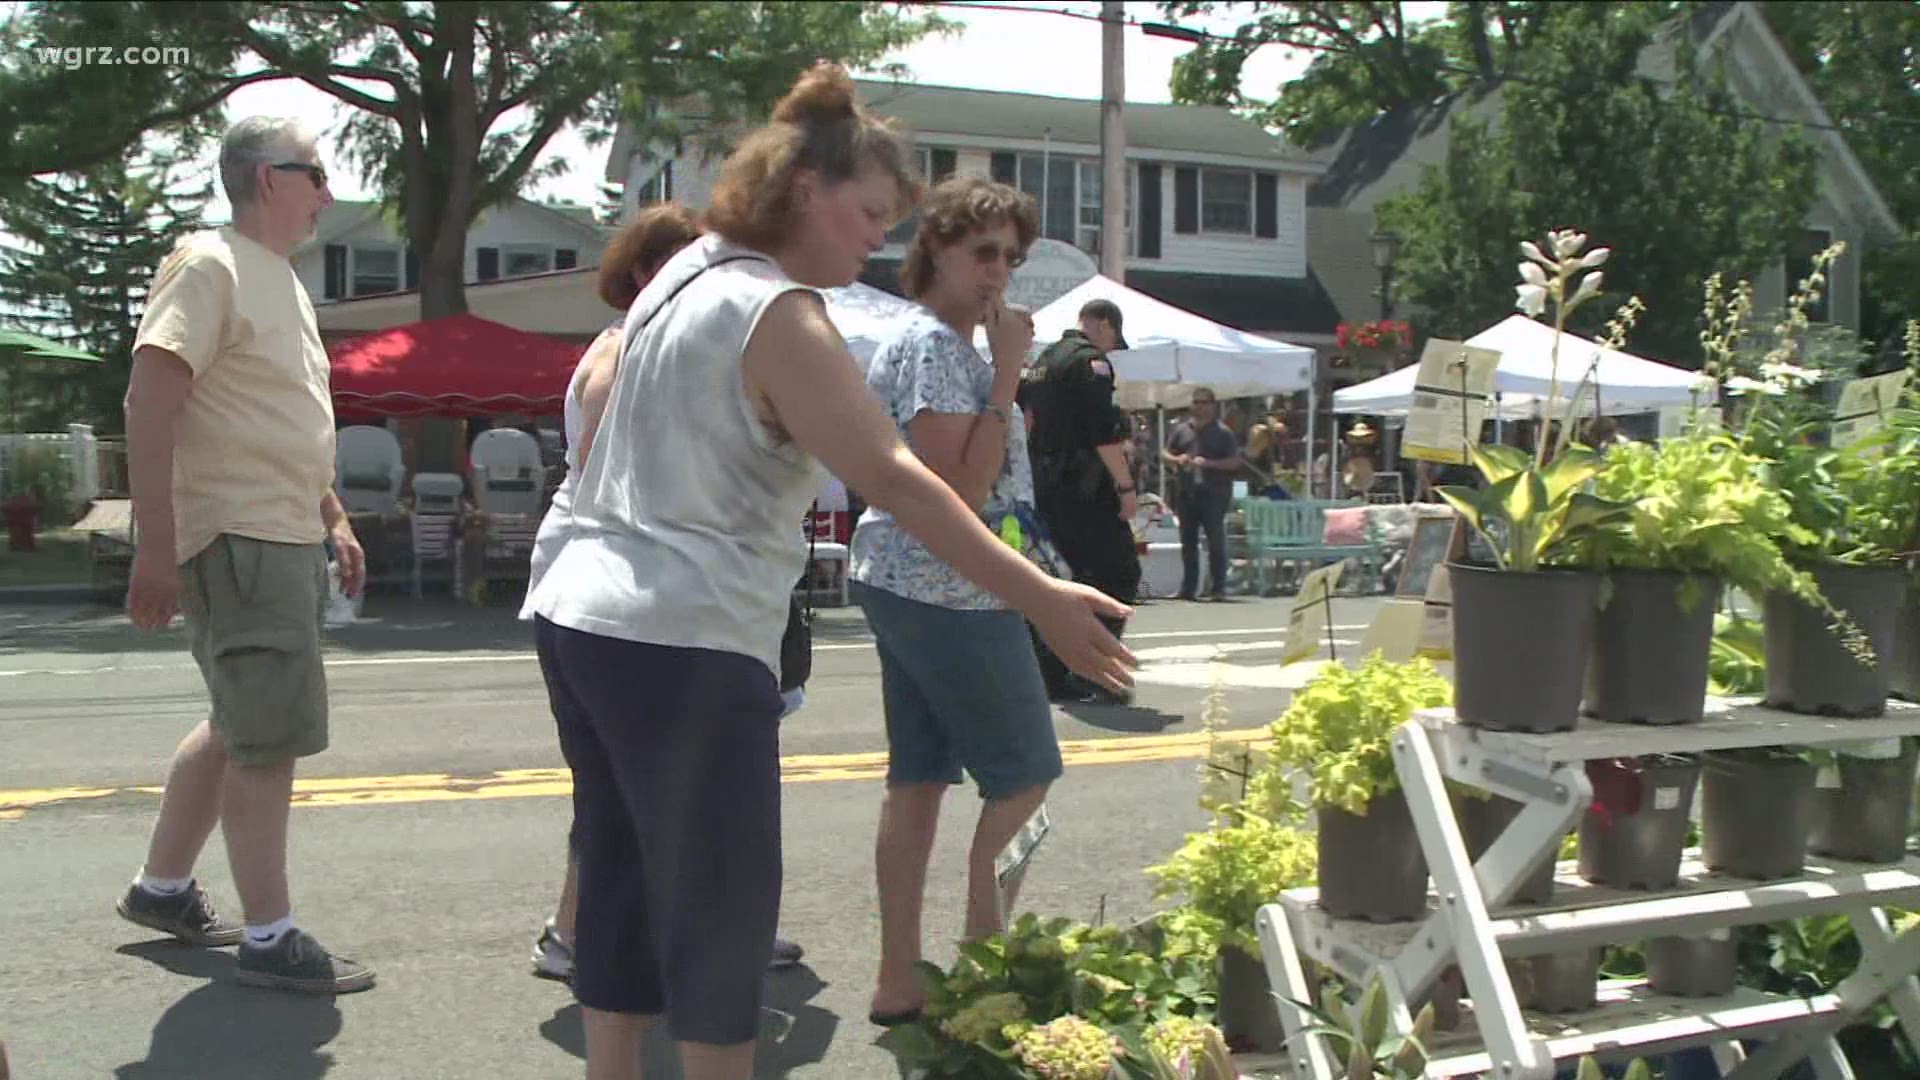 Lewiston Gardenfest Is Back This Year